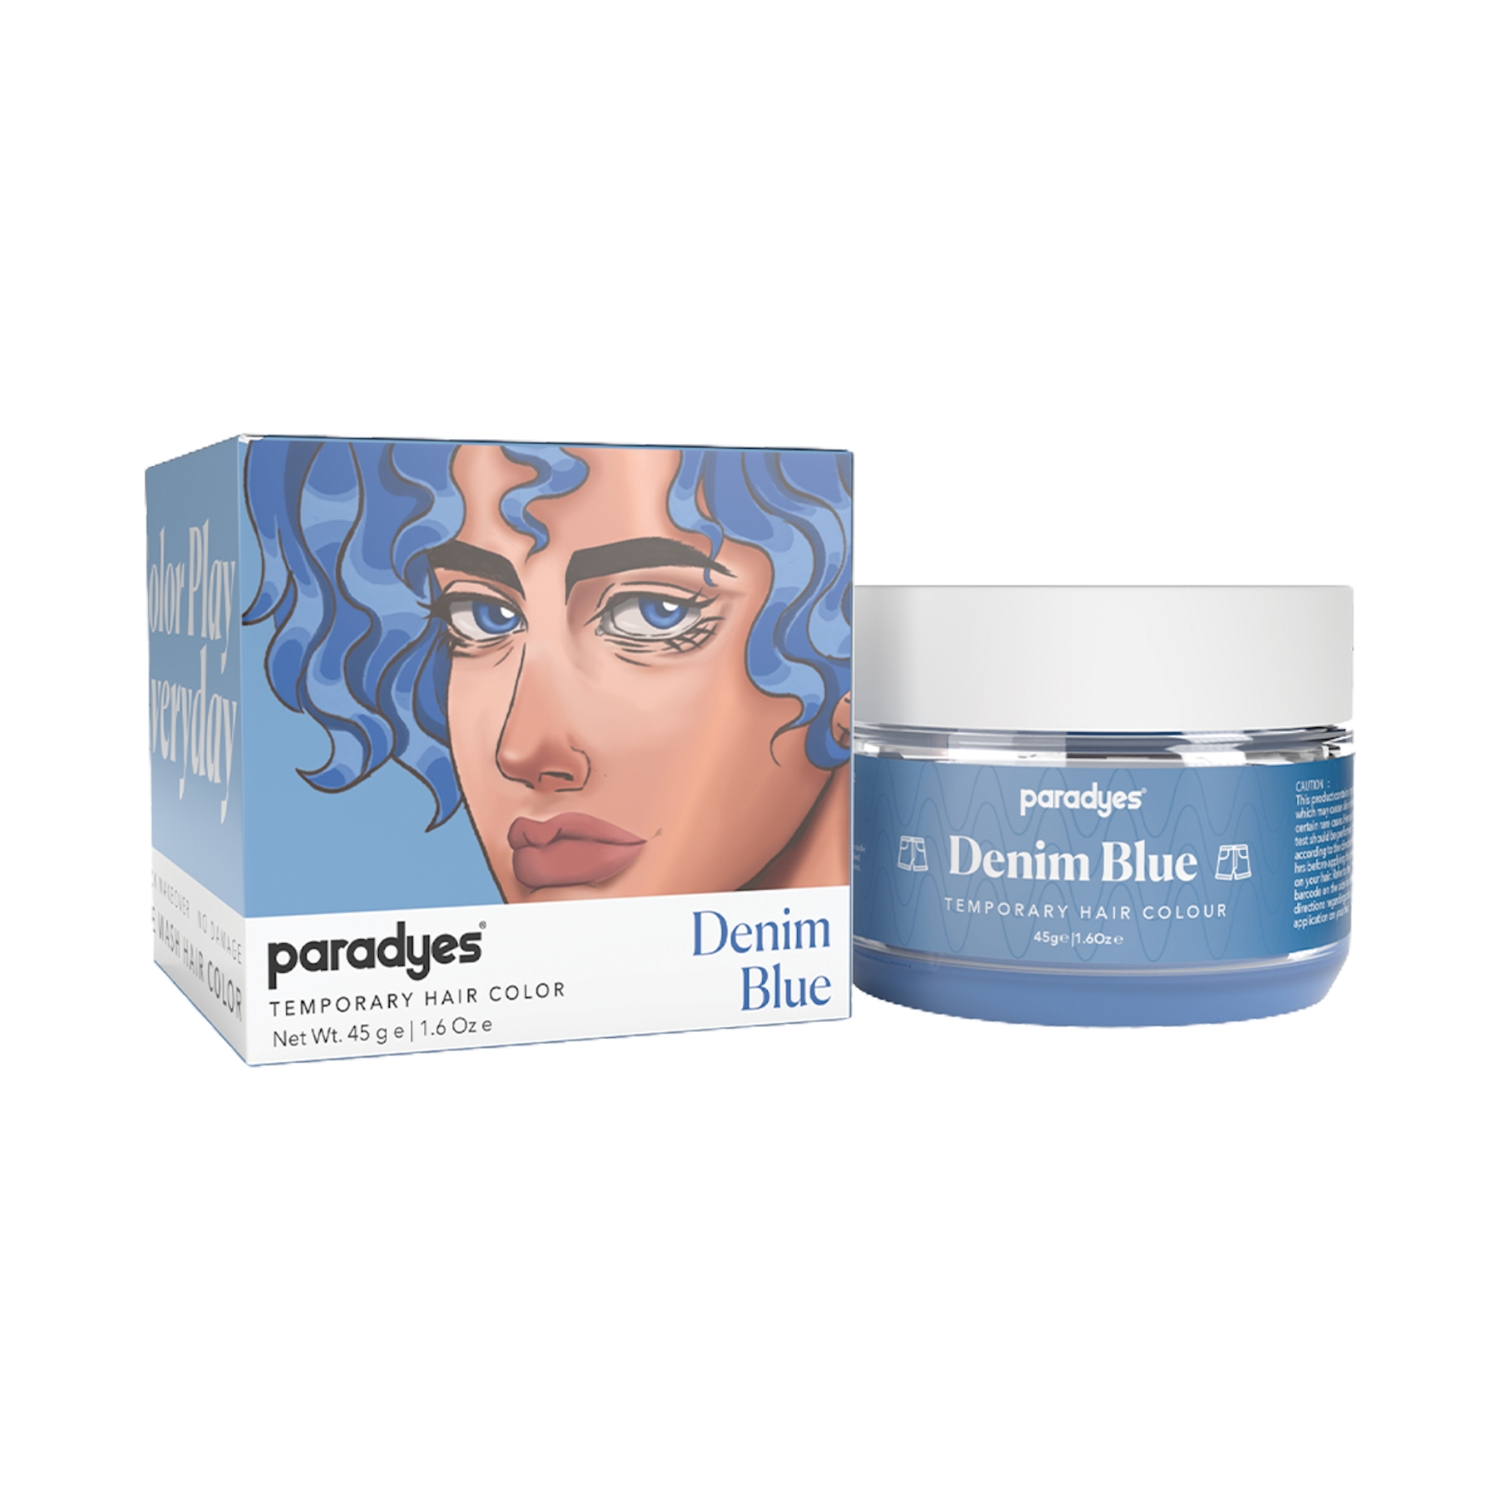 Manic Panic Bad Boy Blue Hair Color - Amplified - Semi-Permanent Hair Dye -  Dark Denim Blue Shade With Green & Grey Undertones - Vegan, Ppd & Ammonia -  Imported Products from USA - iBhejo